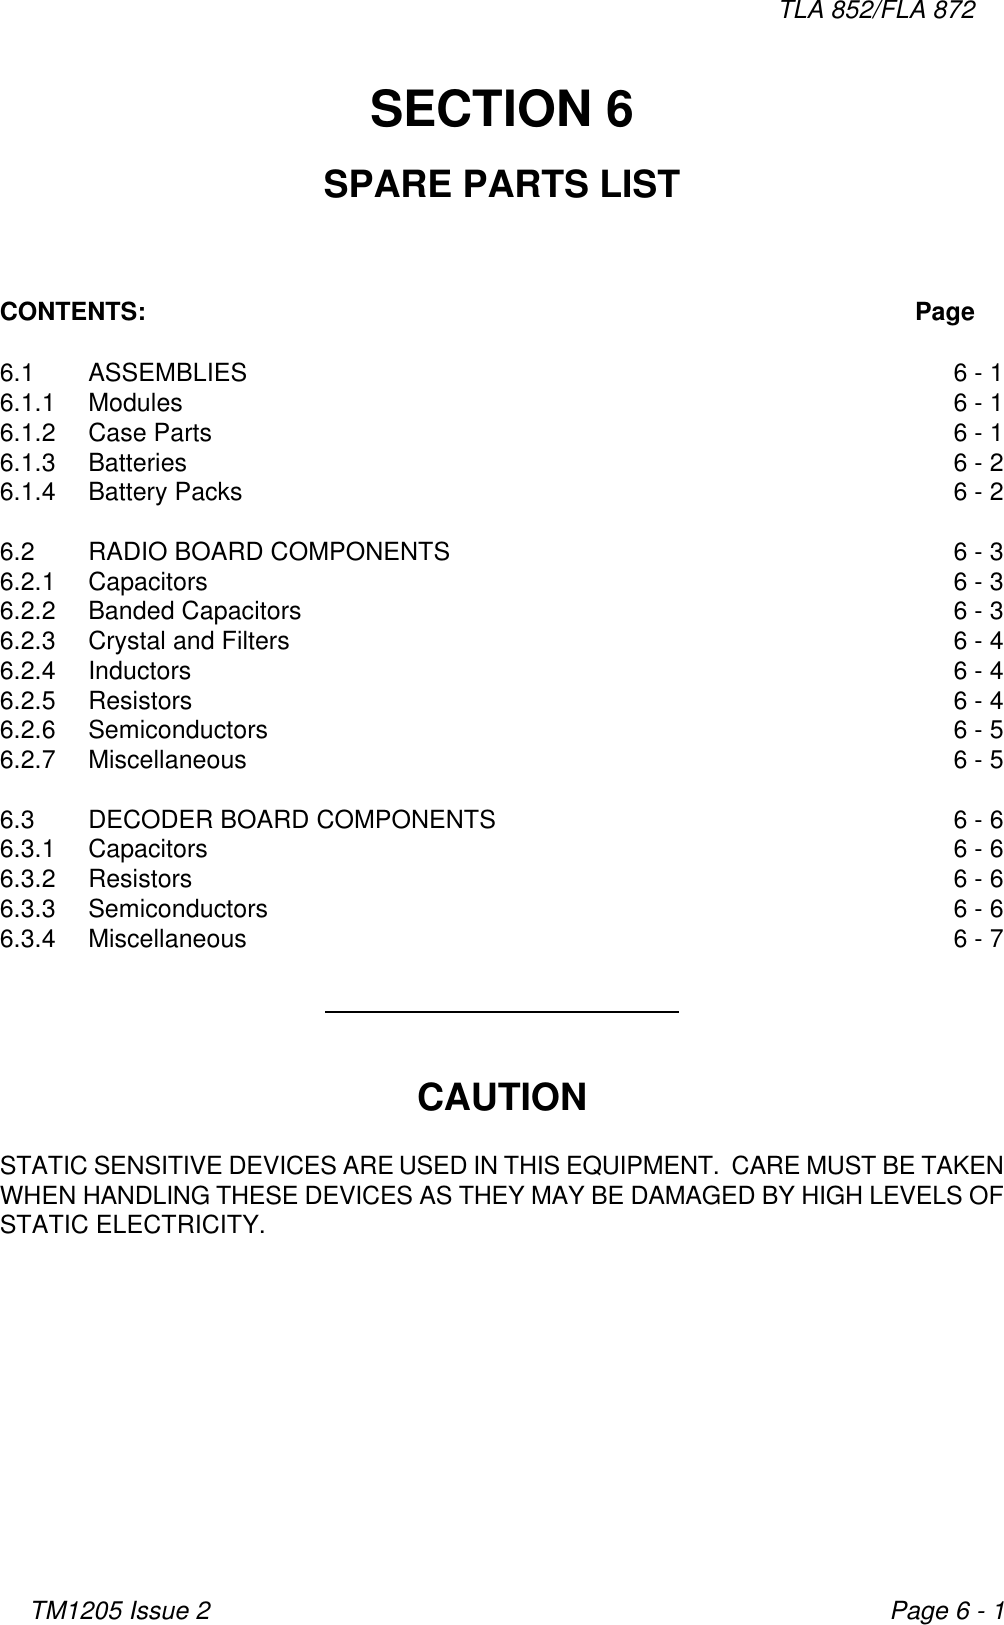 TLA 852/FLA 872TM1205 Issue 2 Page 6 - 1SECTION 6SPARE PARTS LISTCONTENTS: Page6.1 ASSEMBLIES 6 - 16.1.1 Modules 6 - 16.1.2 Case Parts 6 - 16.1.3 Batteries 6 - 26.1.4 Battery Packs 6 - 26.2 RADIO BOARD COMPONENTS 6 - 36.2.1 Capacitors 6 - 36.2.2 Banded Capacitors 6 - 36.2.3 Crystal and Filters 6 - 46.2.4 Inductors 6 - 46.2.5 Resistors 6 - 46.2.6 Semiconductors 6 - 56.2.7 Miscellaneous 6 - 56.3 DECODER BOARD COMPONENTS 6 - 66.3.1 Capacitors 6 - 66.3.2 Resistors 6 - 66.3.3 Semiconductors 6 - 66.3.4 Miscellaneous 6 - 7CAUTIONSTATIC SENSITIVE DEVICES ARE USED IN THIS EQUIPMENT.  CARE MUST BE TAKENWHEN HANDLING THESE DEVICES AS THEY MAY BE DAMAGED BY HIGH LEVELS OFSTATIC ELECTRICITY.